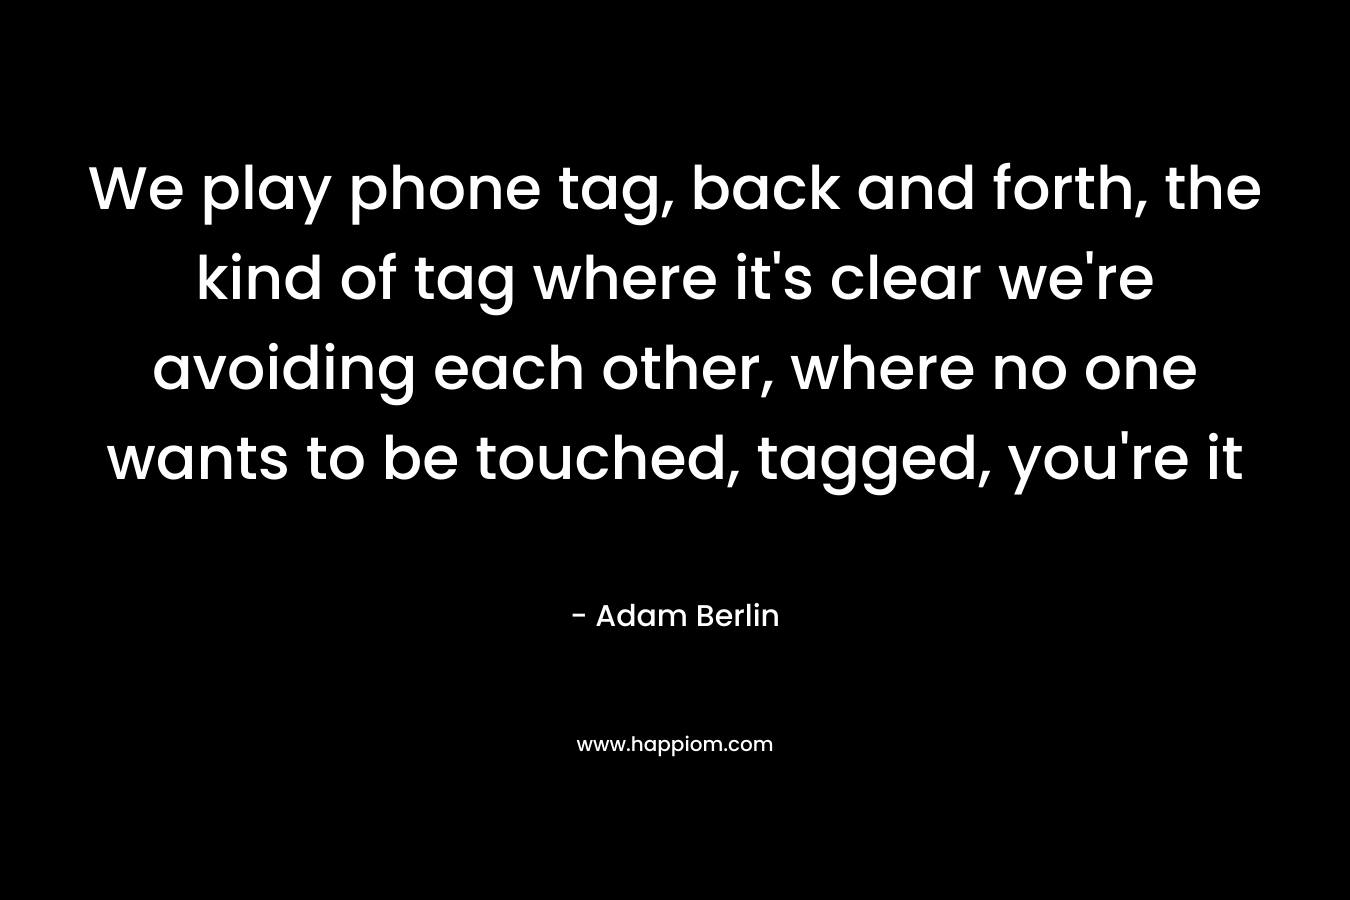 We play phone tag, back and forth, the kind of tag where it’s clear we’re avoiding each other, where no one wants to be touched, tagged, you’re it – Adam Berlin